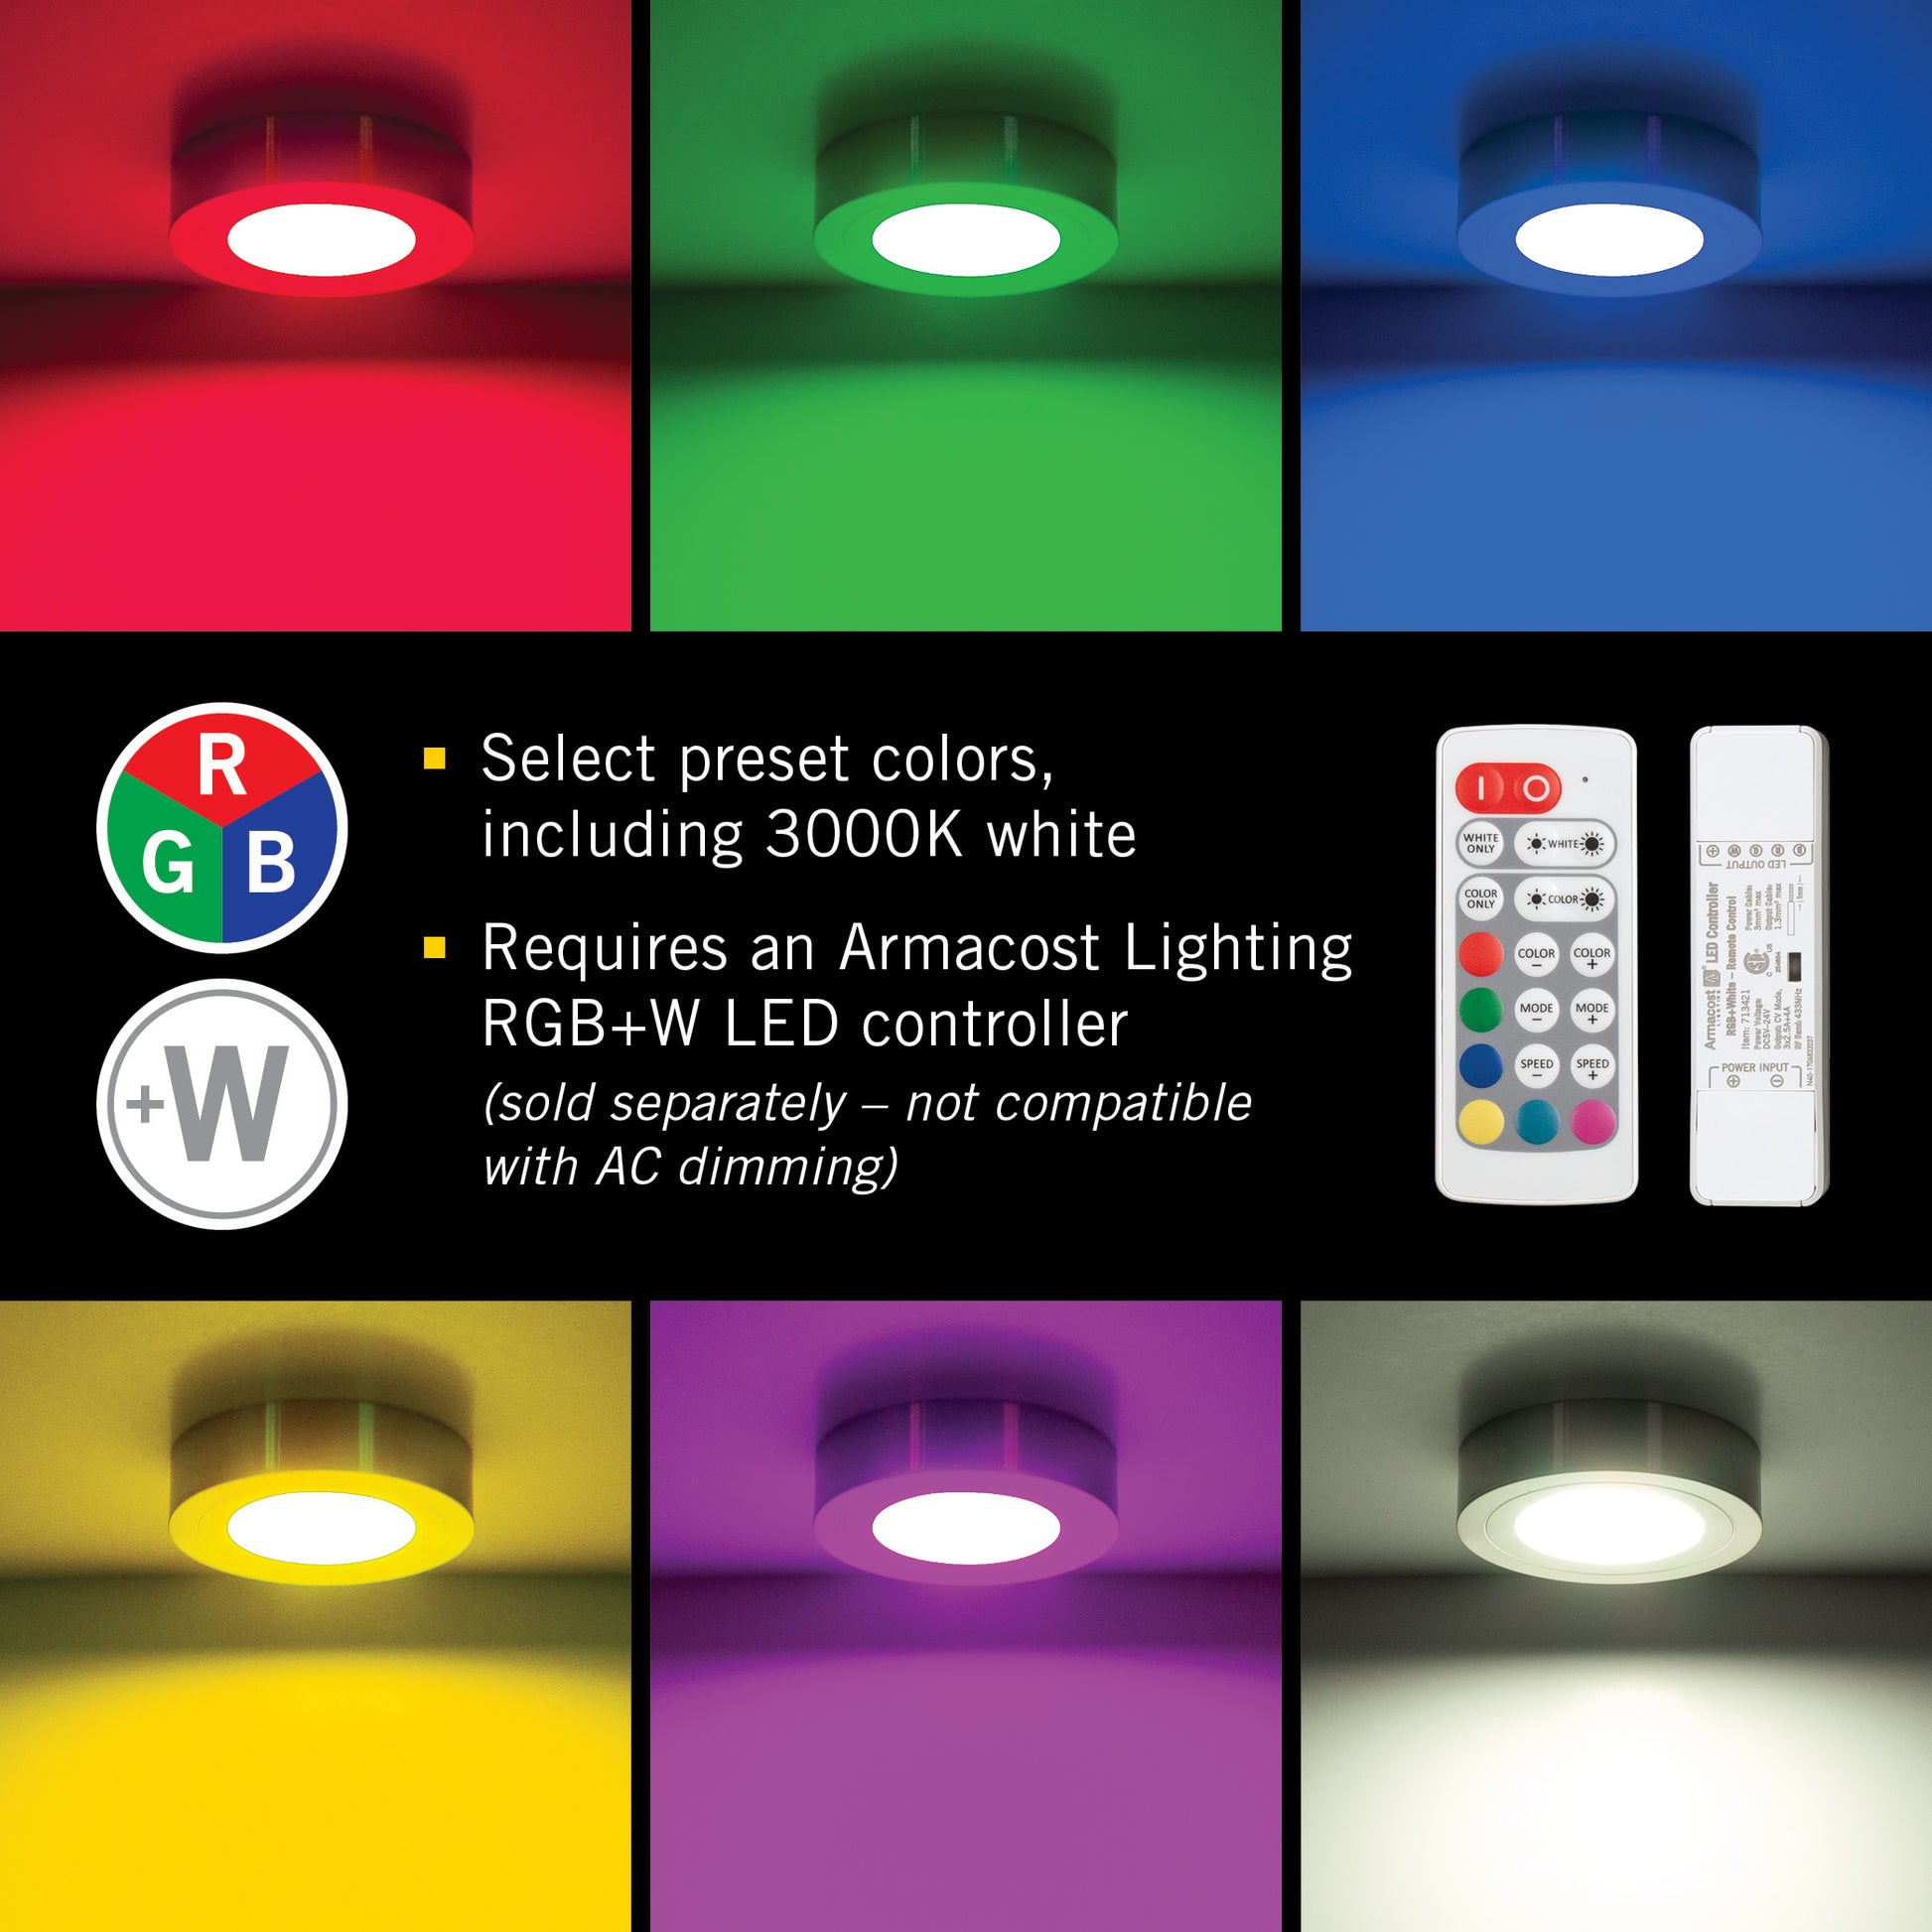 PureVue RGB+W LED Puck Light – Armacost Lighting